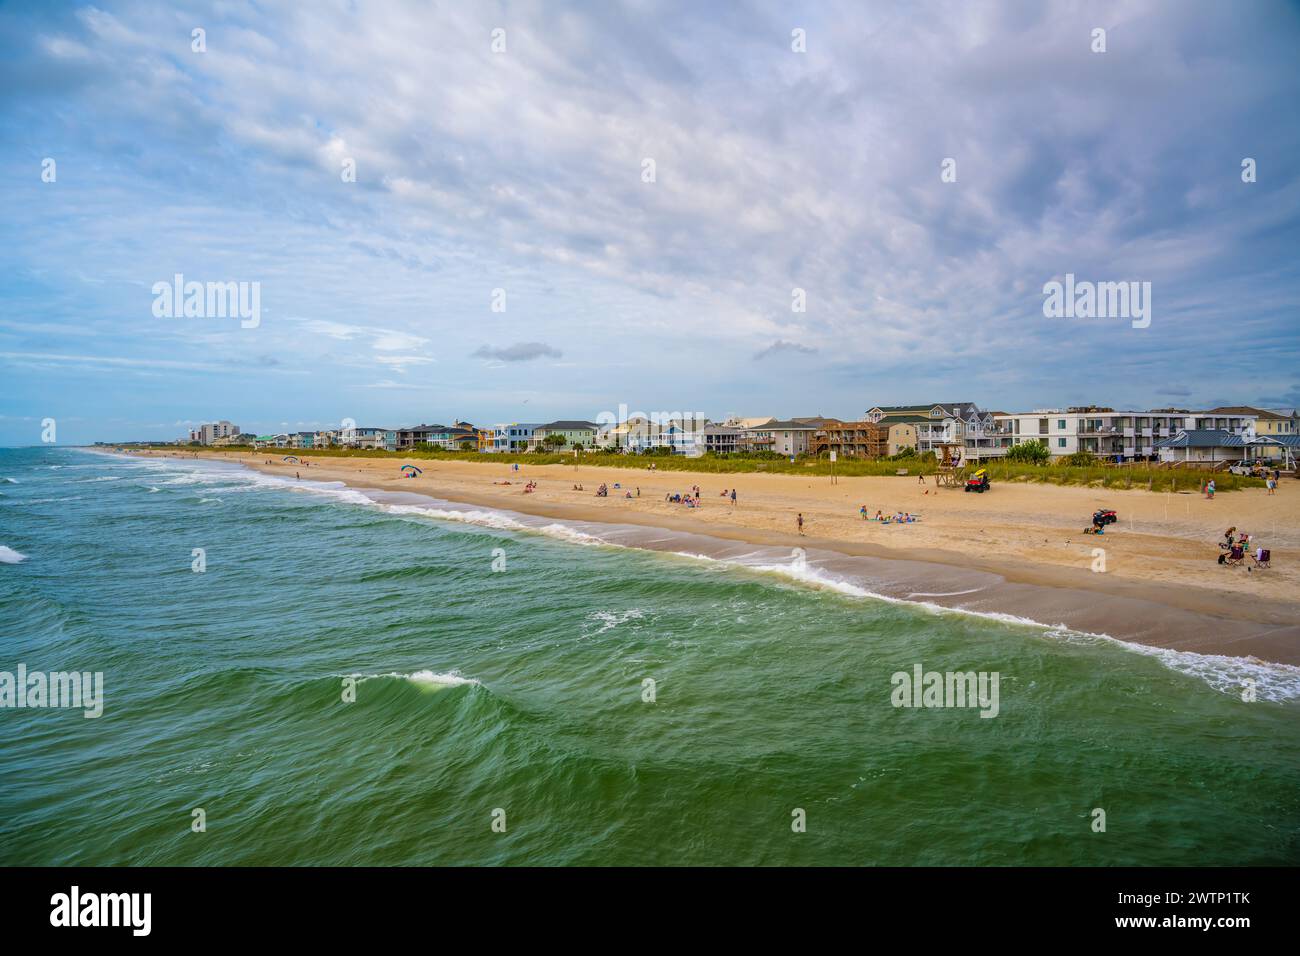 An overlooking view in North Carolina, Wilmington Beach Stock Photo